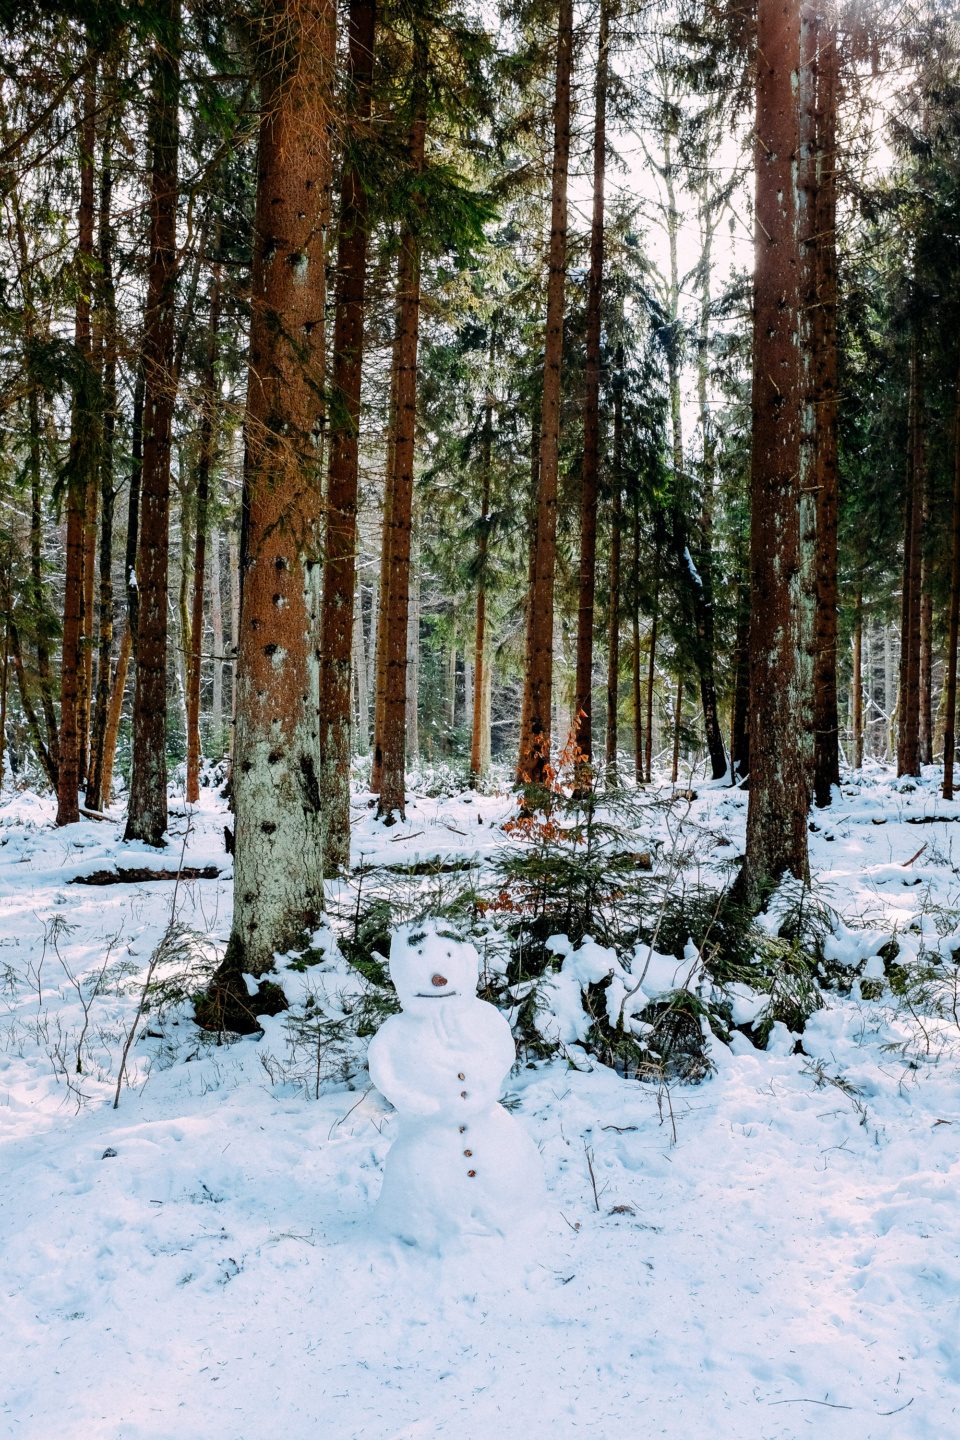 A snowman in a pine forest